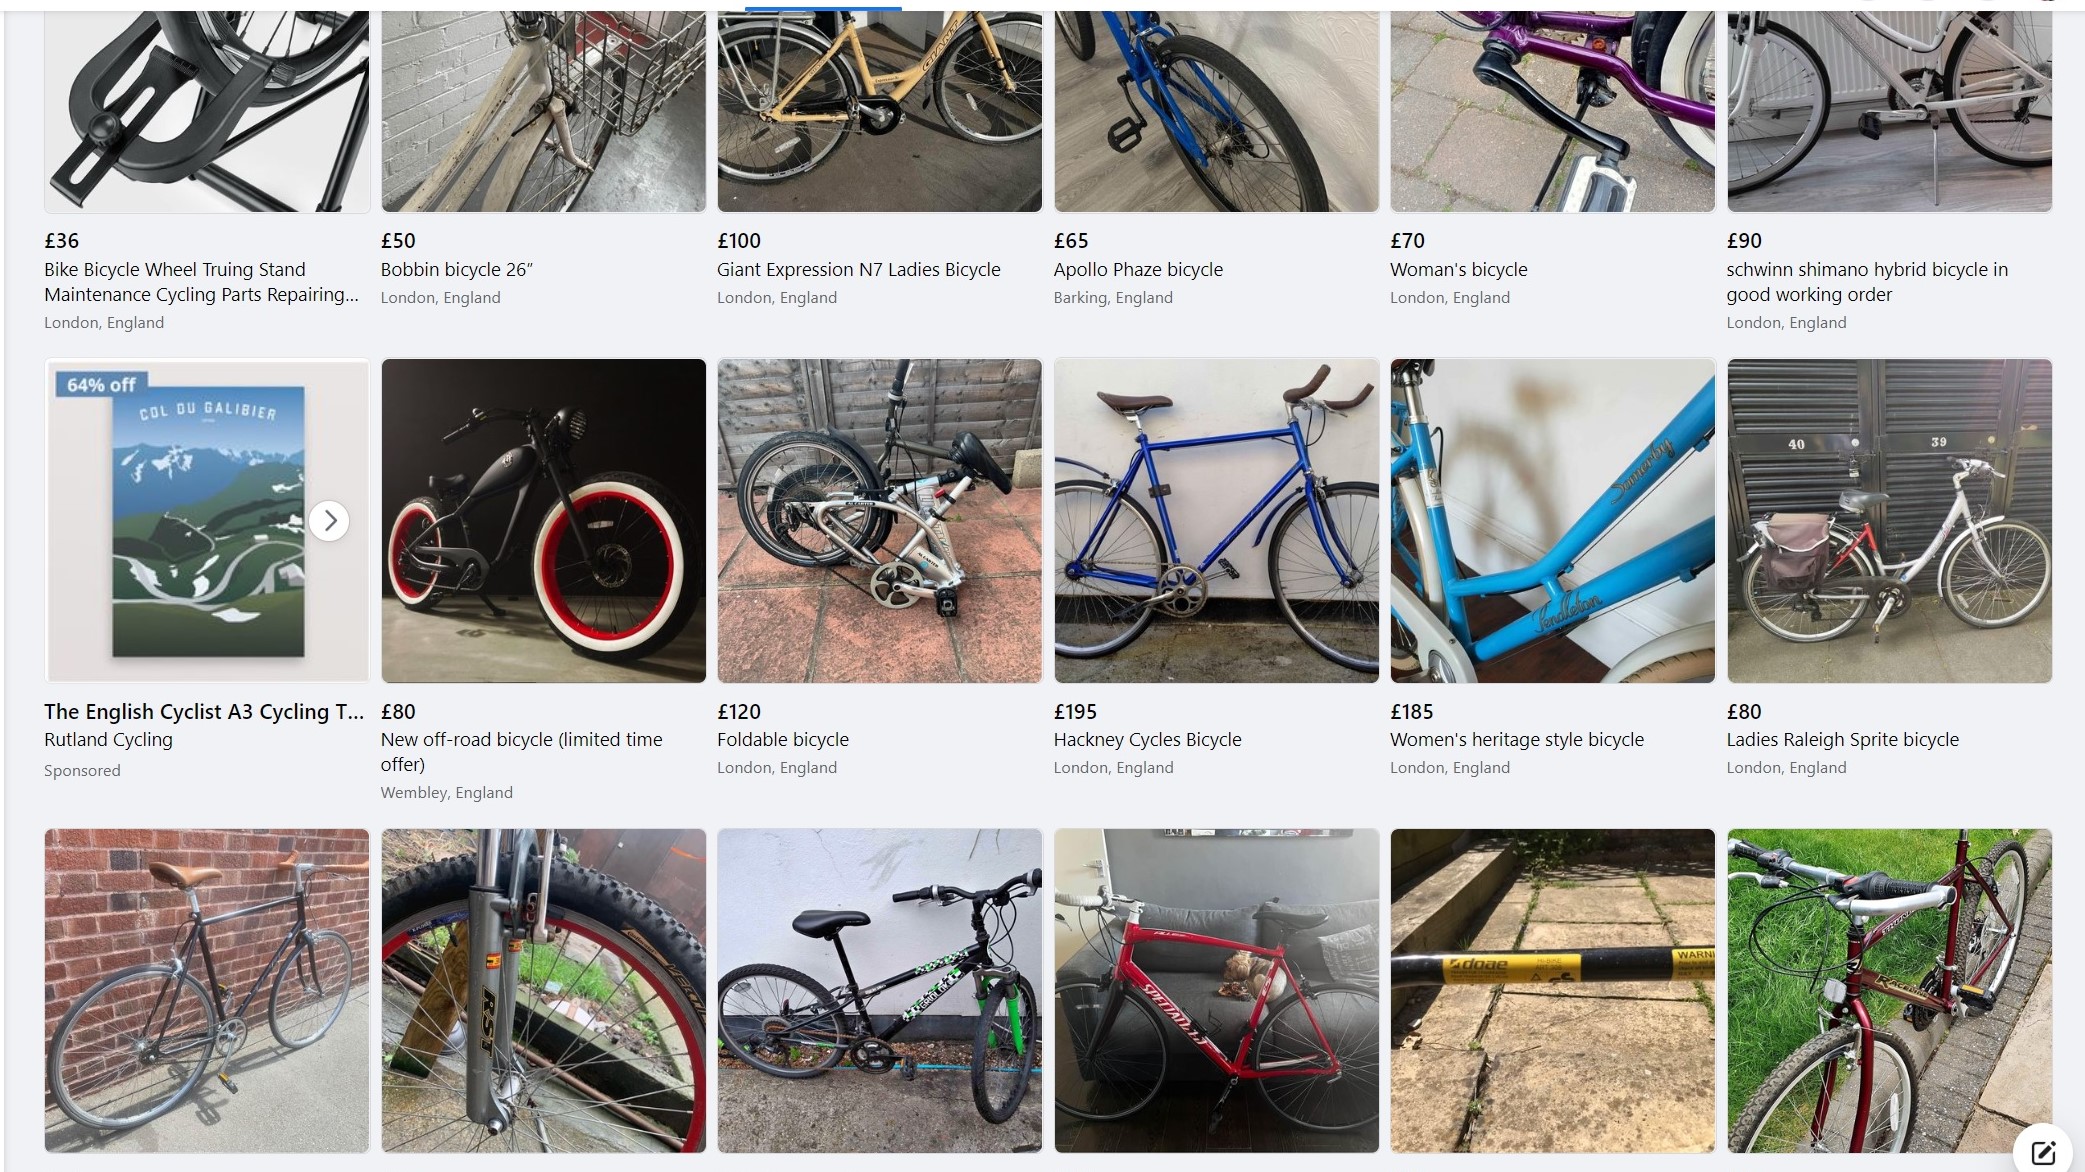 How to sell a used bike Dont leave it in the shed, sell it to generate cash or fund the next one Cyclingnews